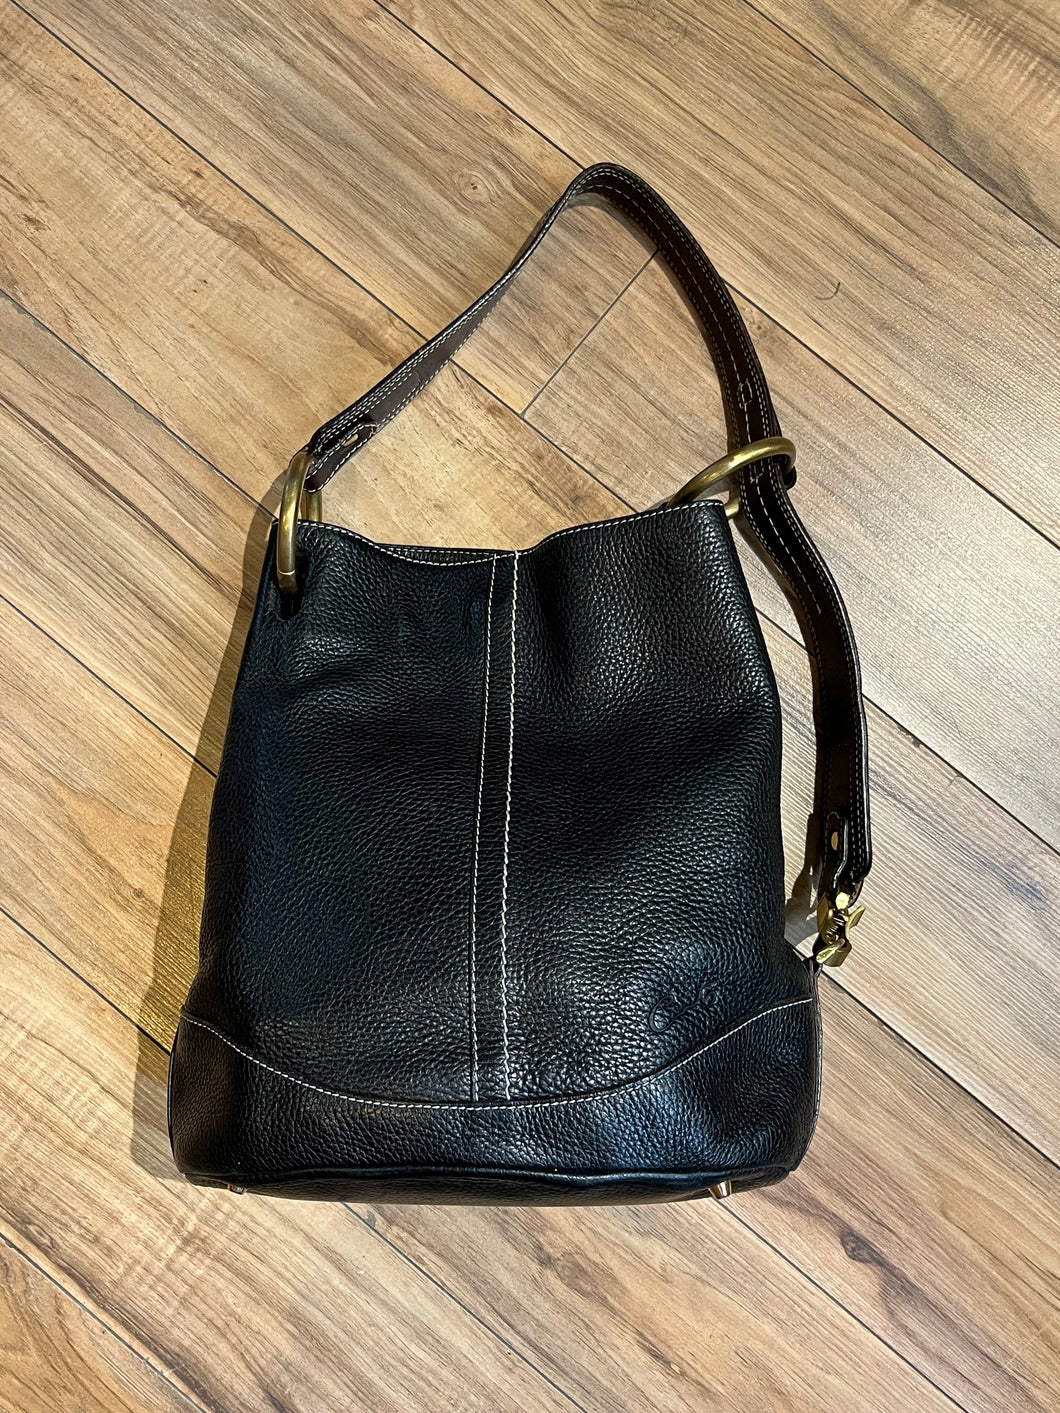 Cats Black Leather Bucket Bag, Made in Spain